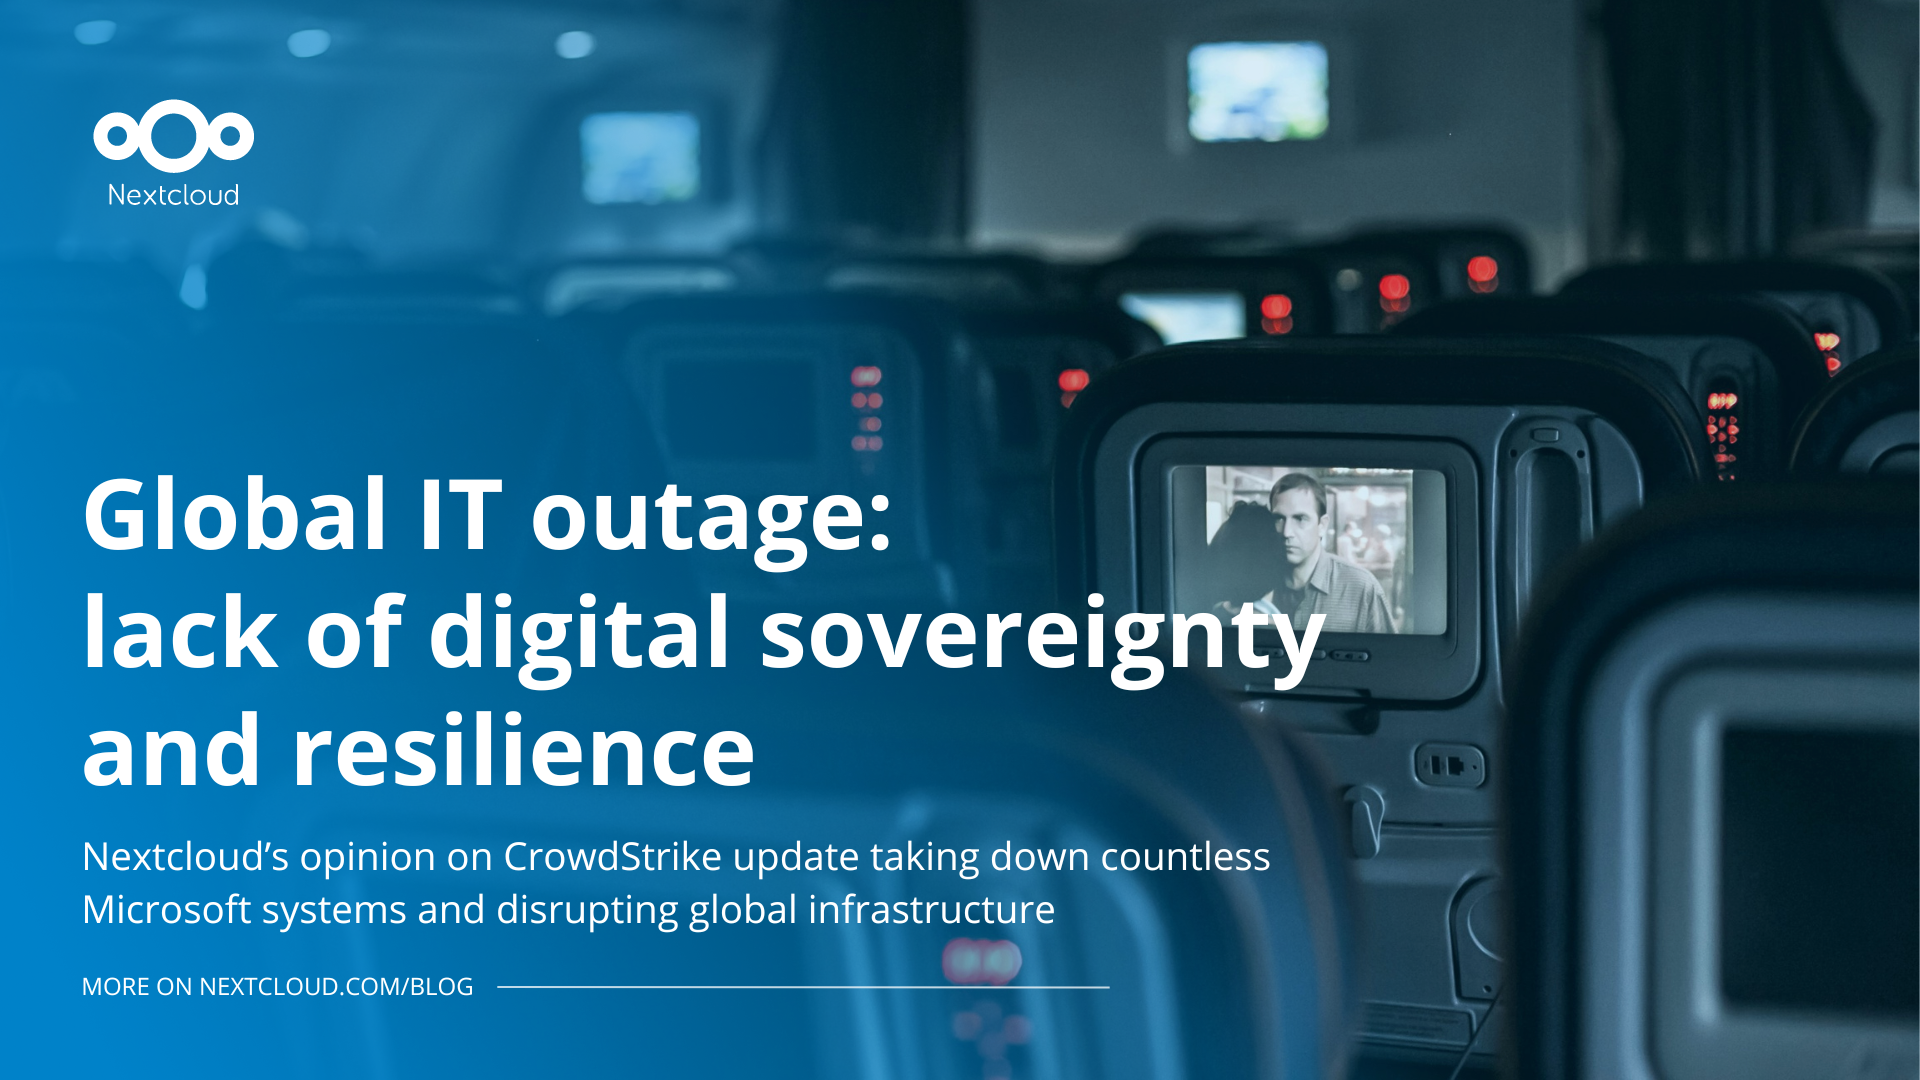 Global IT outage shows lack of digital sovereignty and resilience